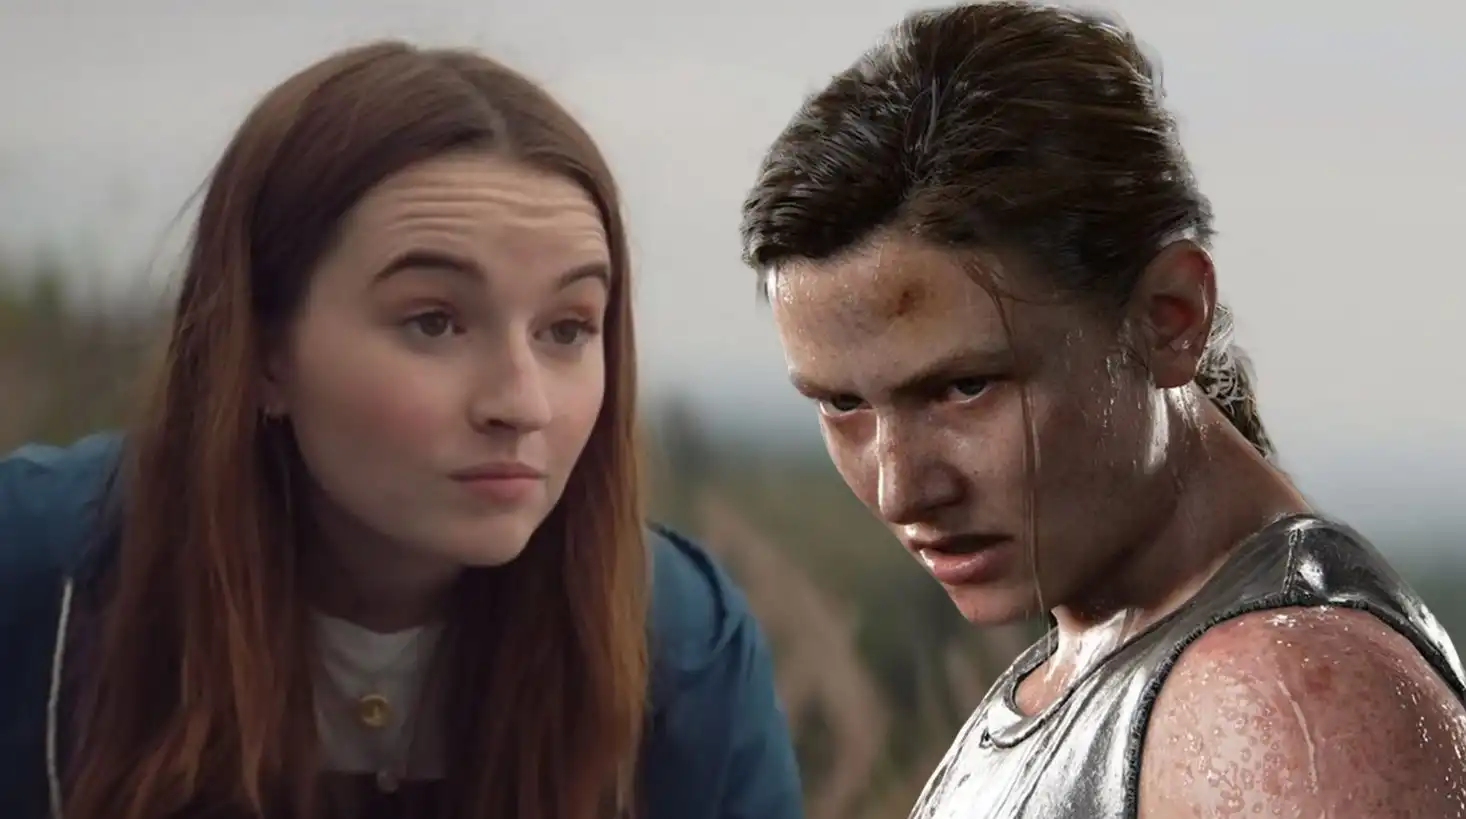 Kaitlyn Dever cast as Abby in The Last of Us Season 2